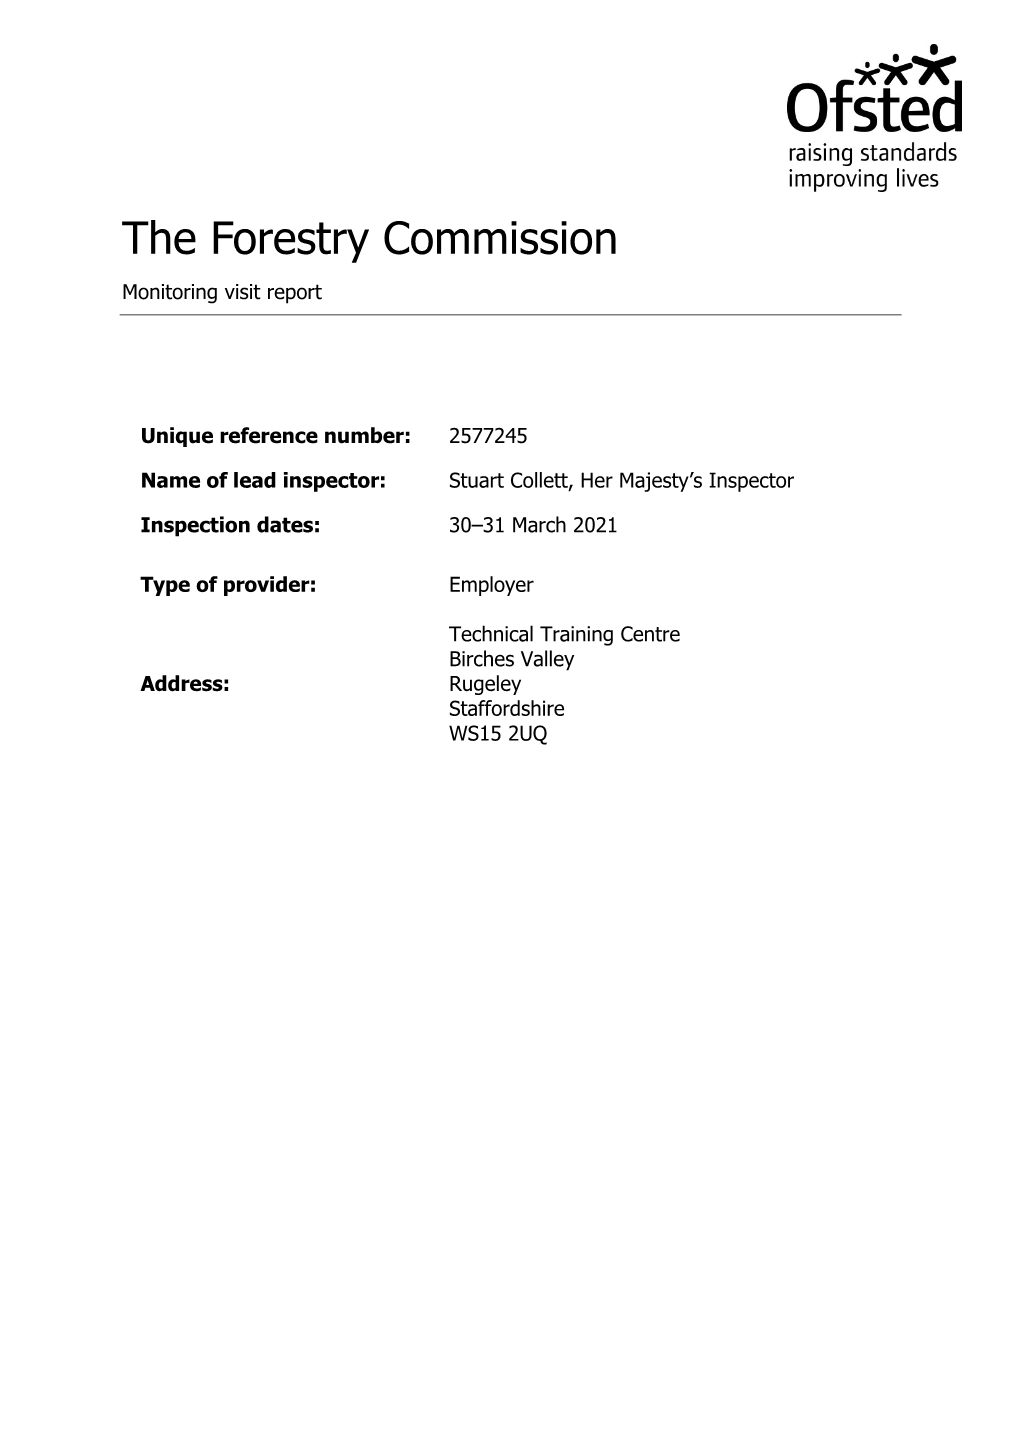 The Forestry Commission Monitoring Visit Report